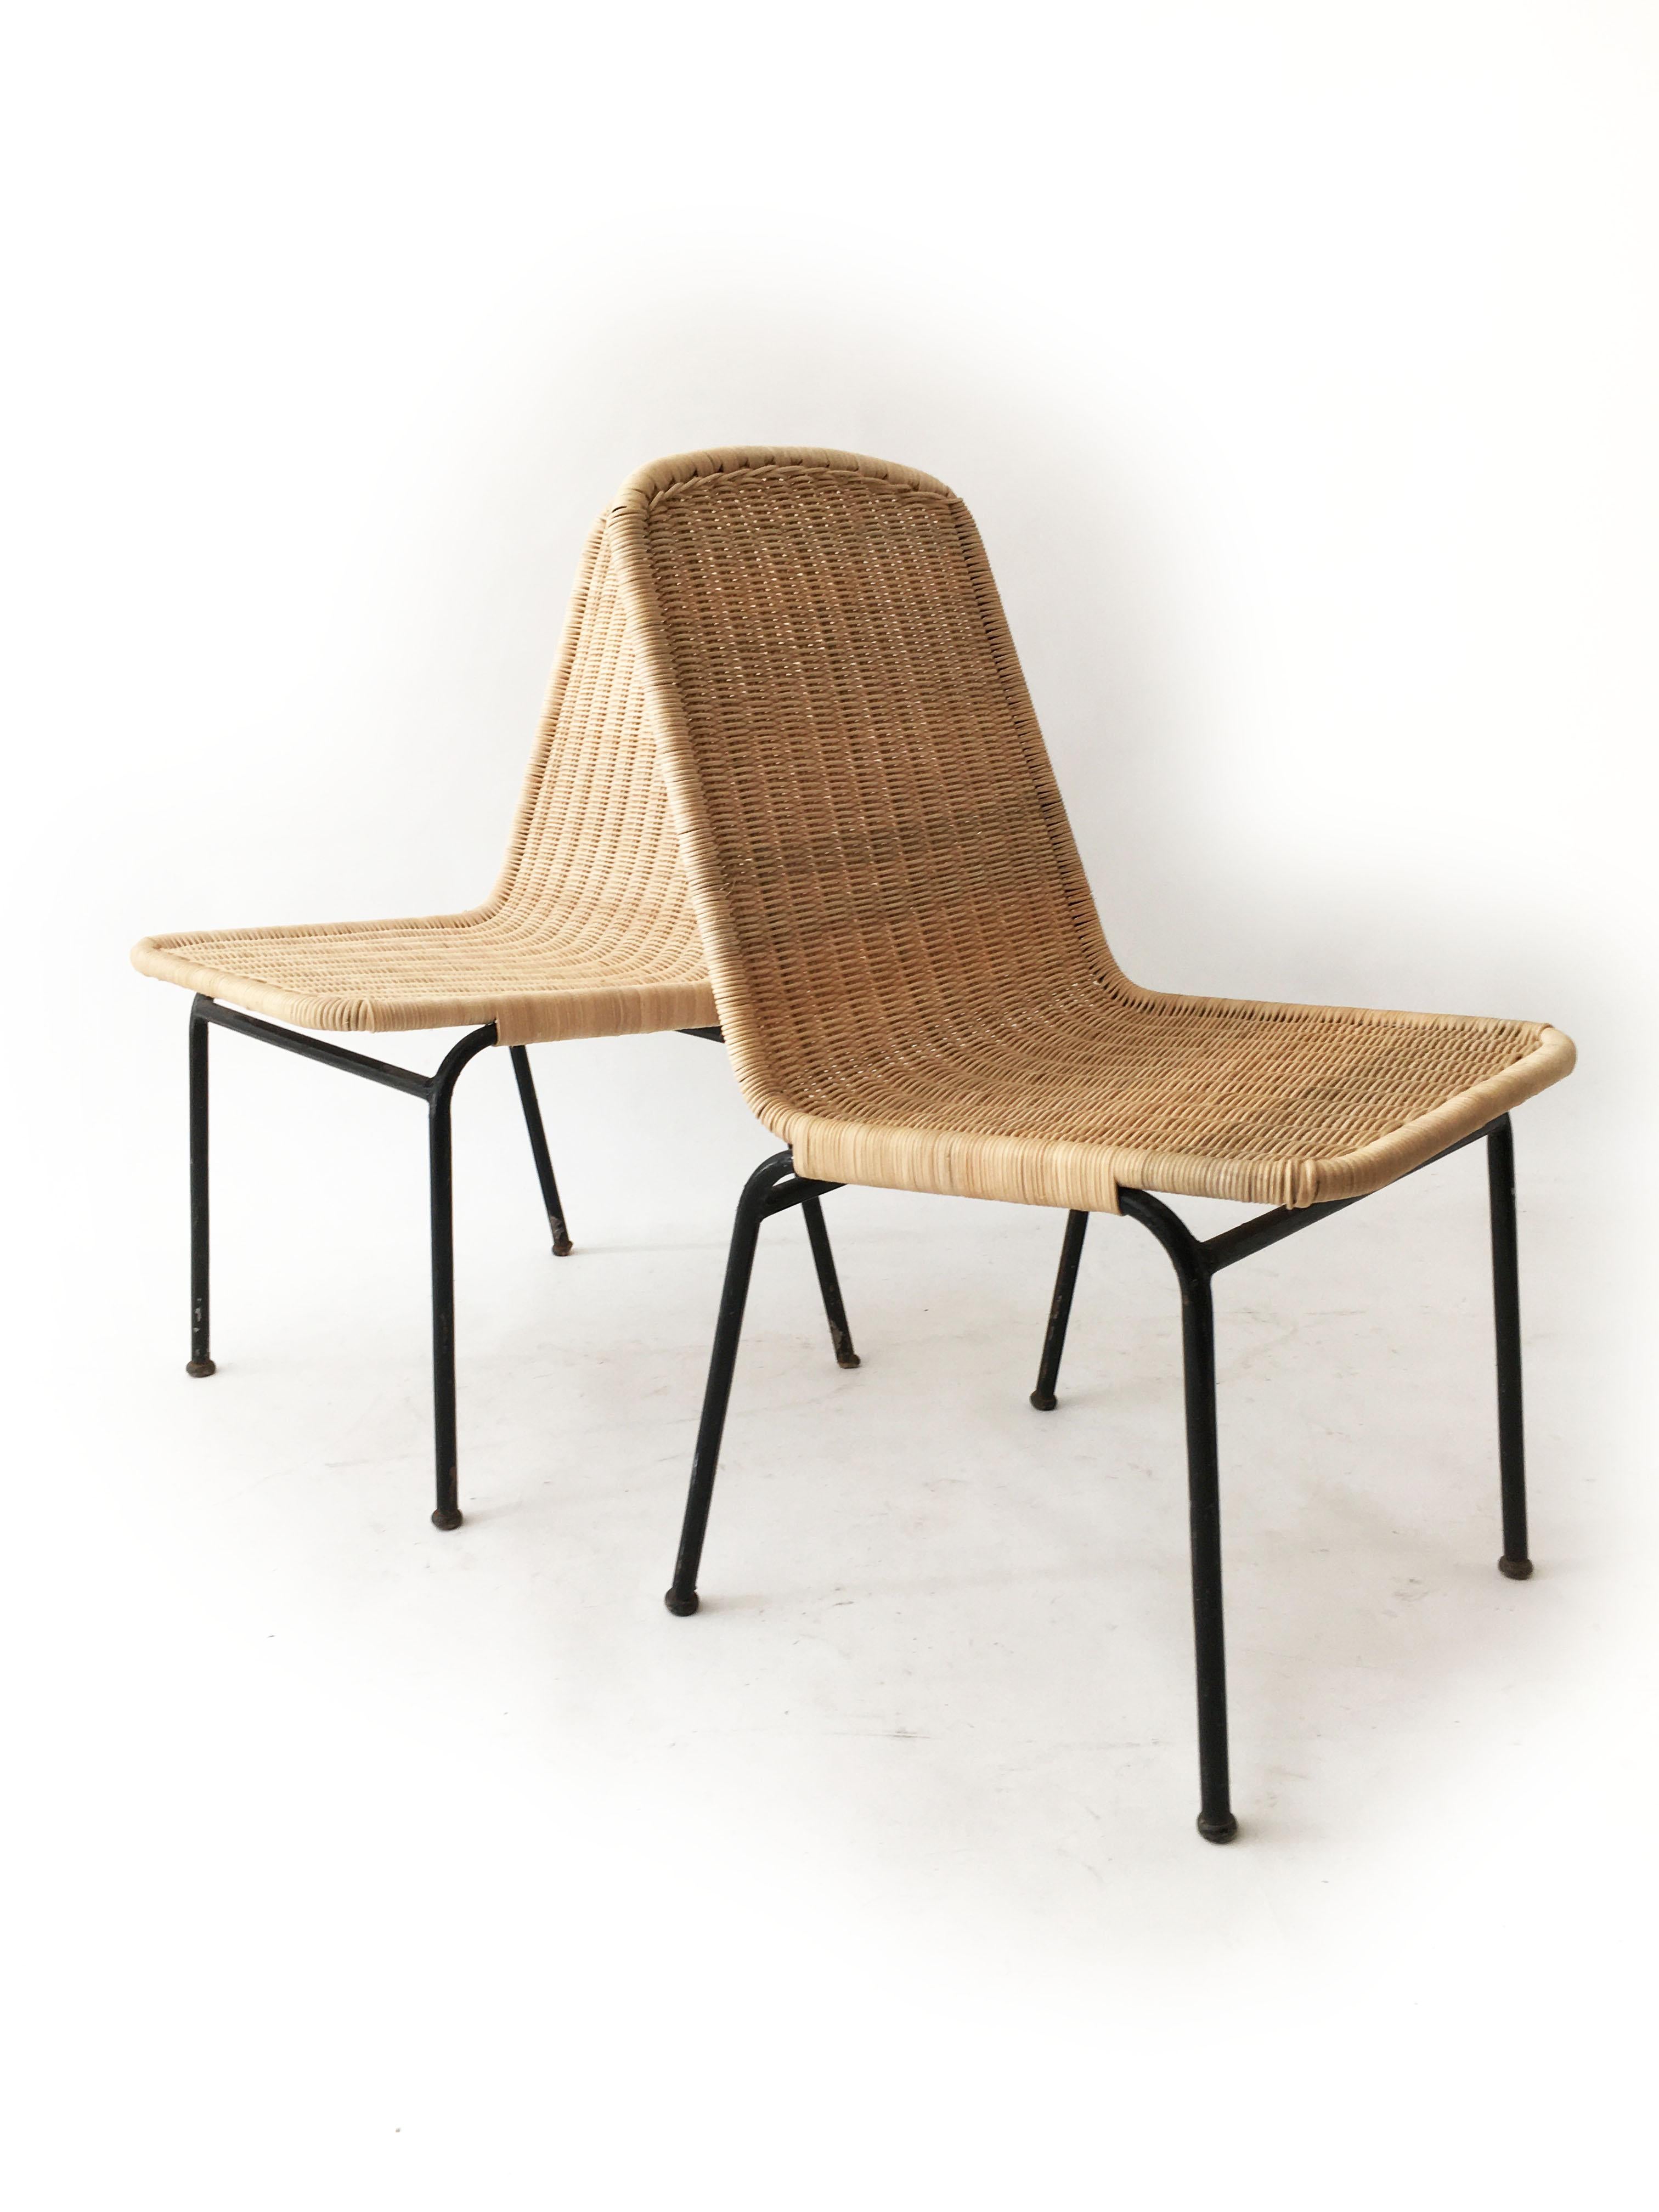 Fine pair of modernist midcentury wicker and iron chairs. This is a rare set of two from Austria 1950s. We renewed the wicker seats and backrests to refresh the beautifully sculpted organic shape. Great to be placed as occasional chairs in the